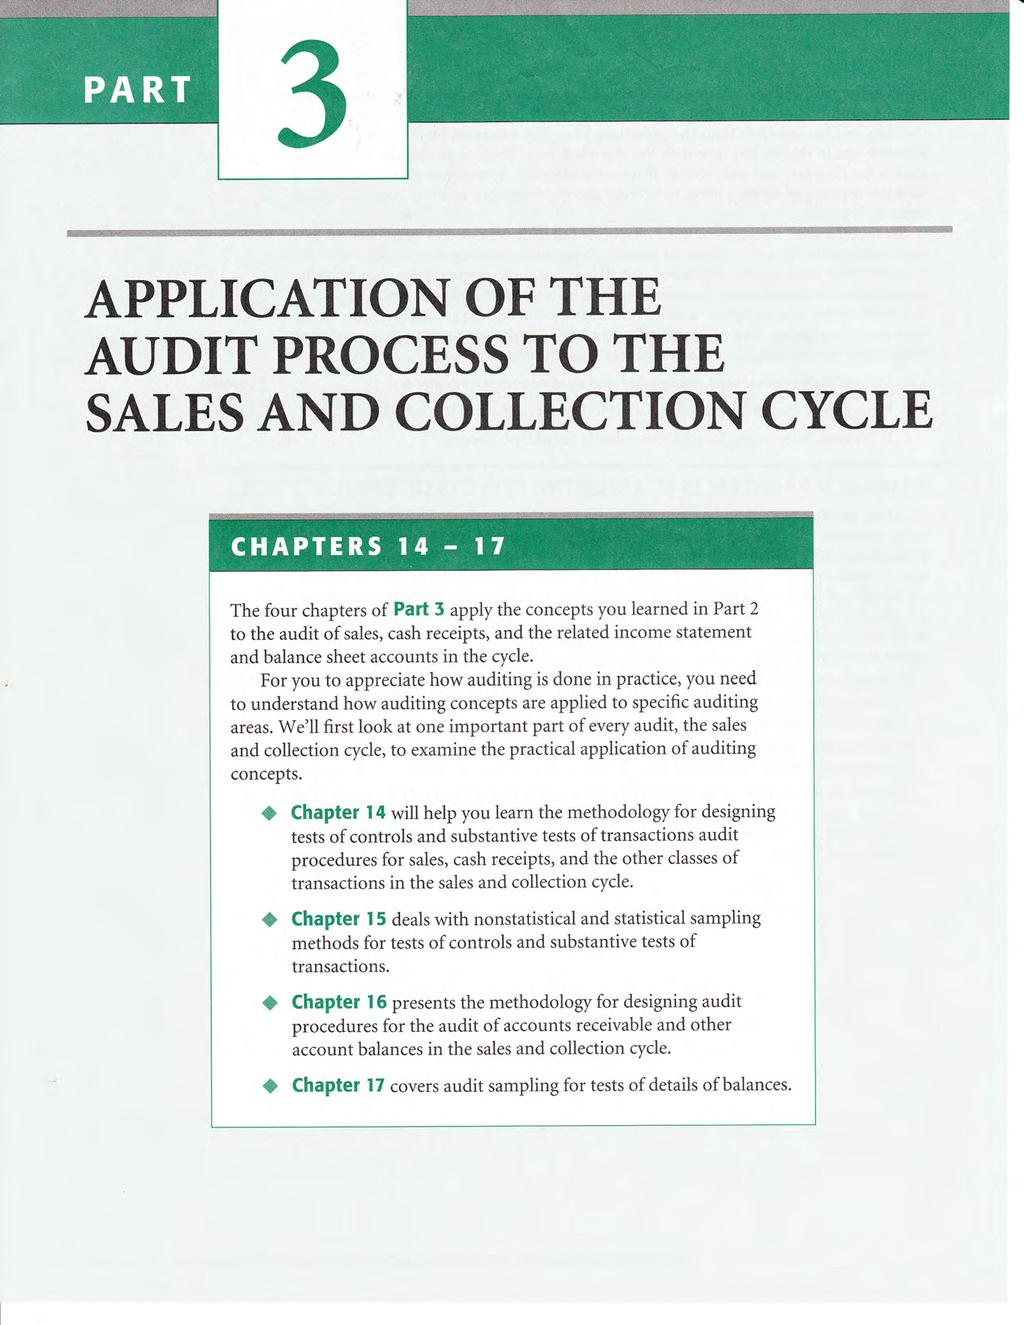 APPLICATION OF THE AUDIT PROCESS TO THE SALES AND COLTECTION CYCLE The four chapters of Part 5 apply the concepts you learned in Part 2 to the audit of sales, cash receipts, and the related income